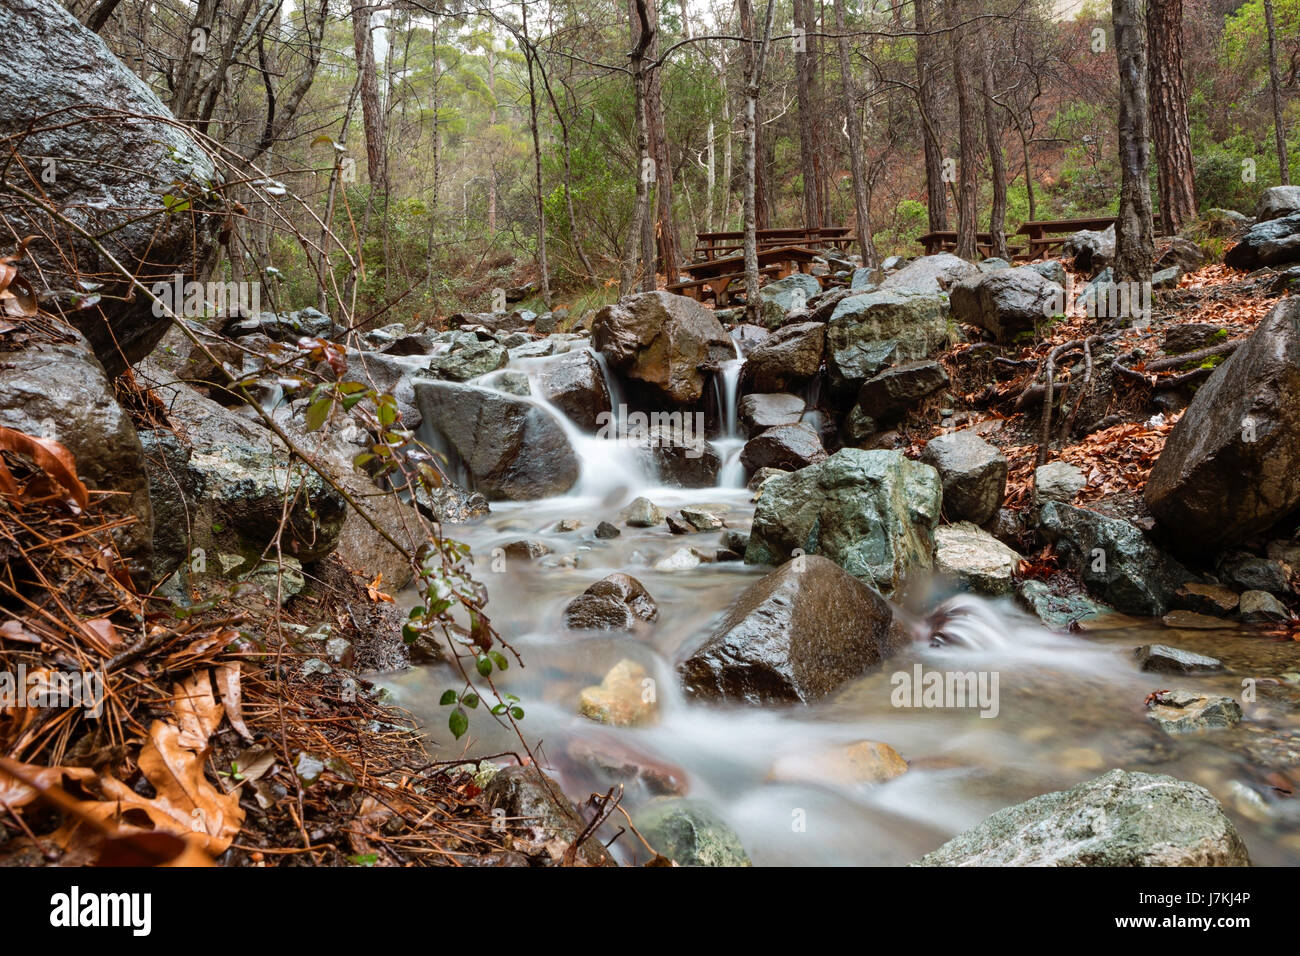 Peaceful Scenic Stream In The Mountains Stock Photo